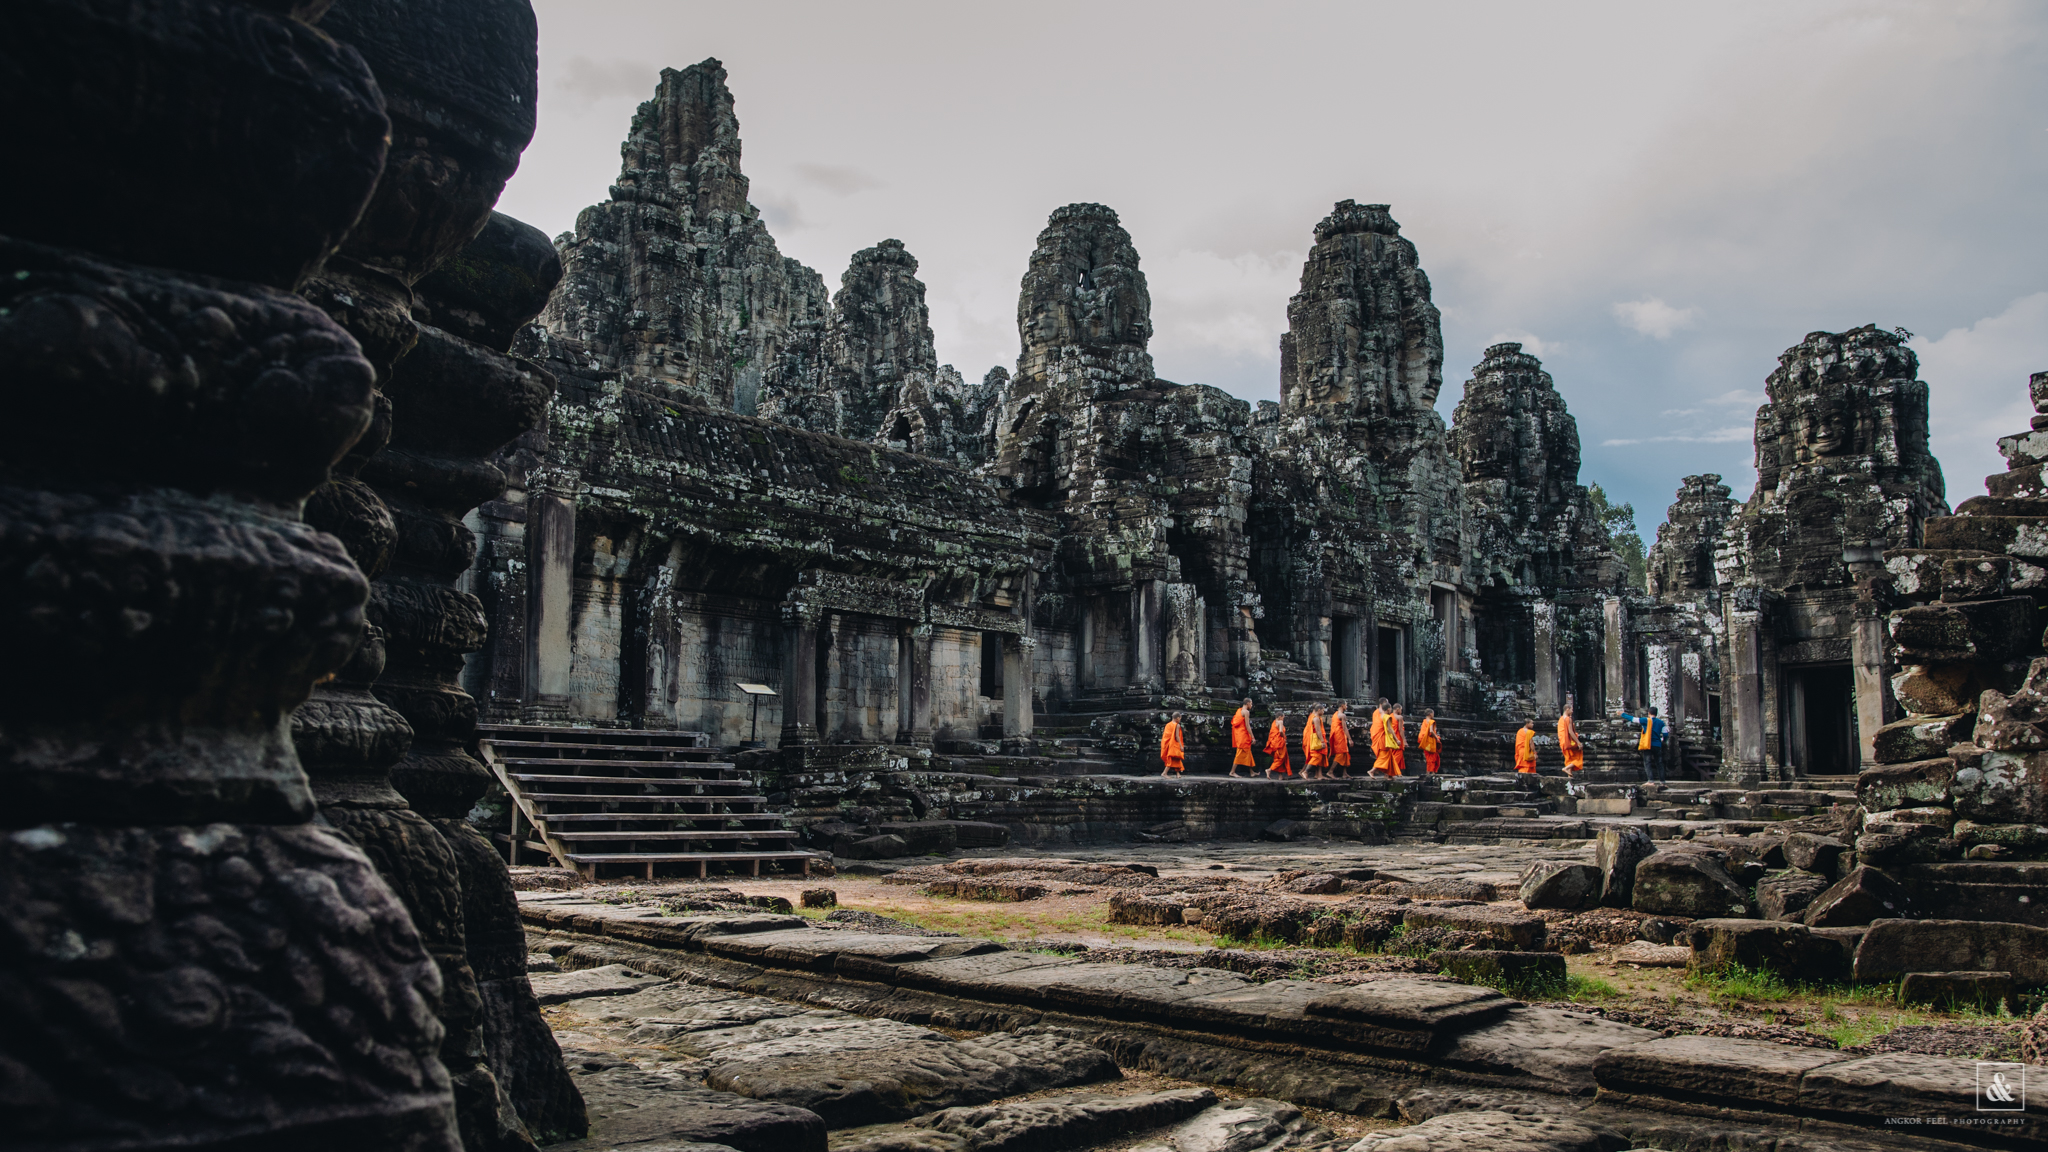 Bayon temple and monks